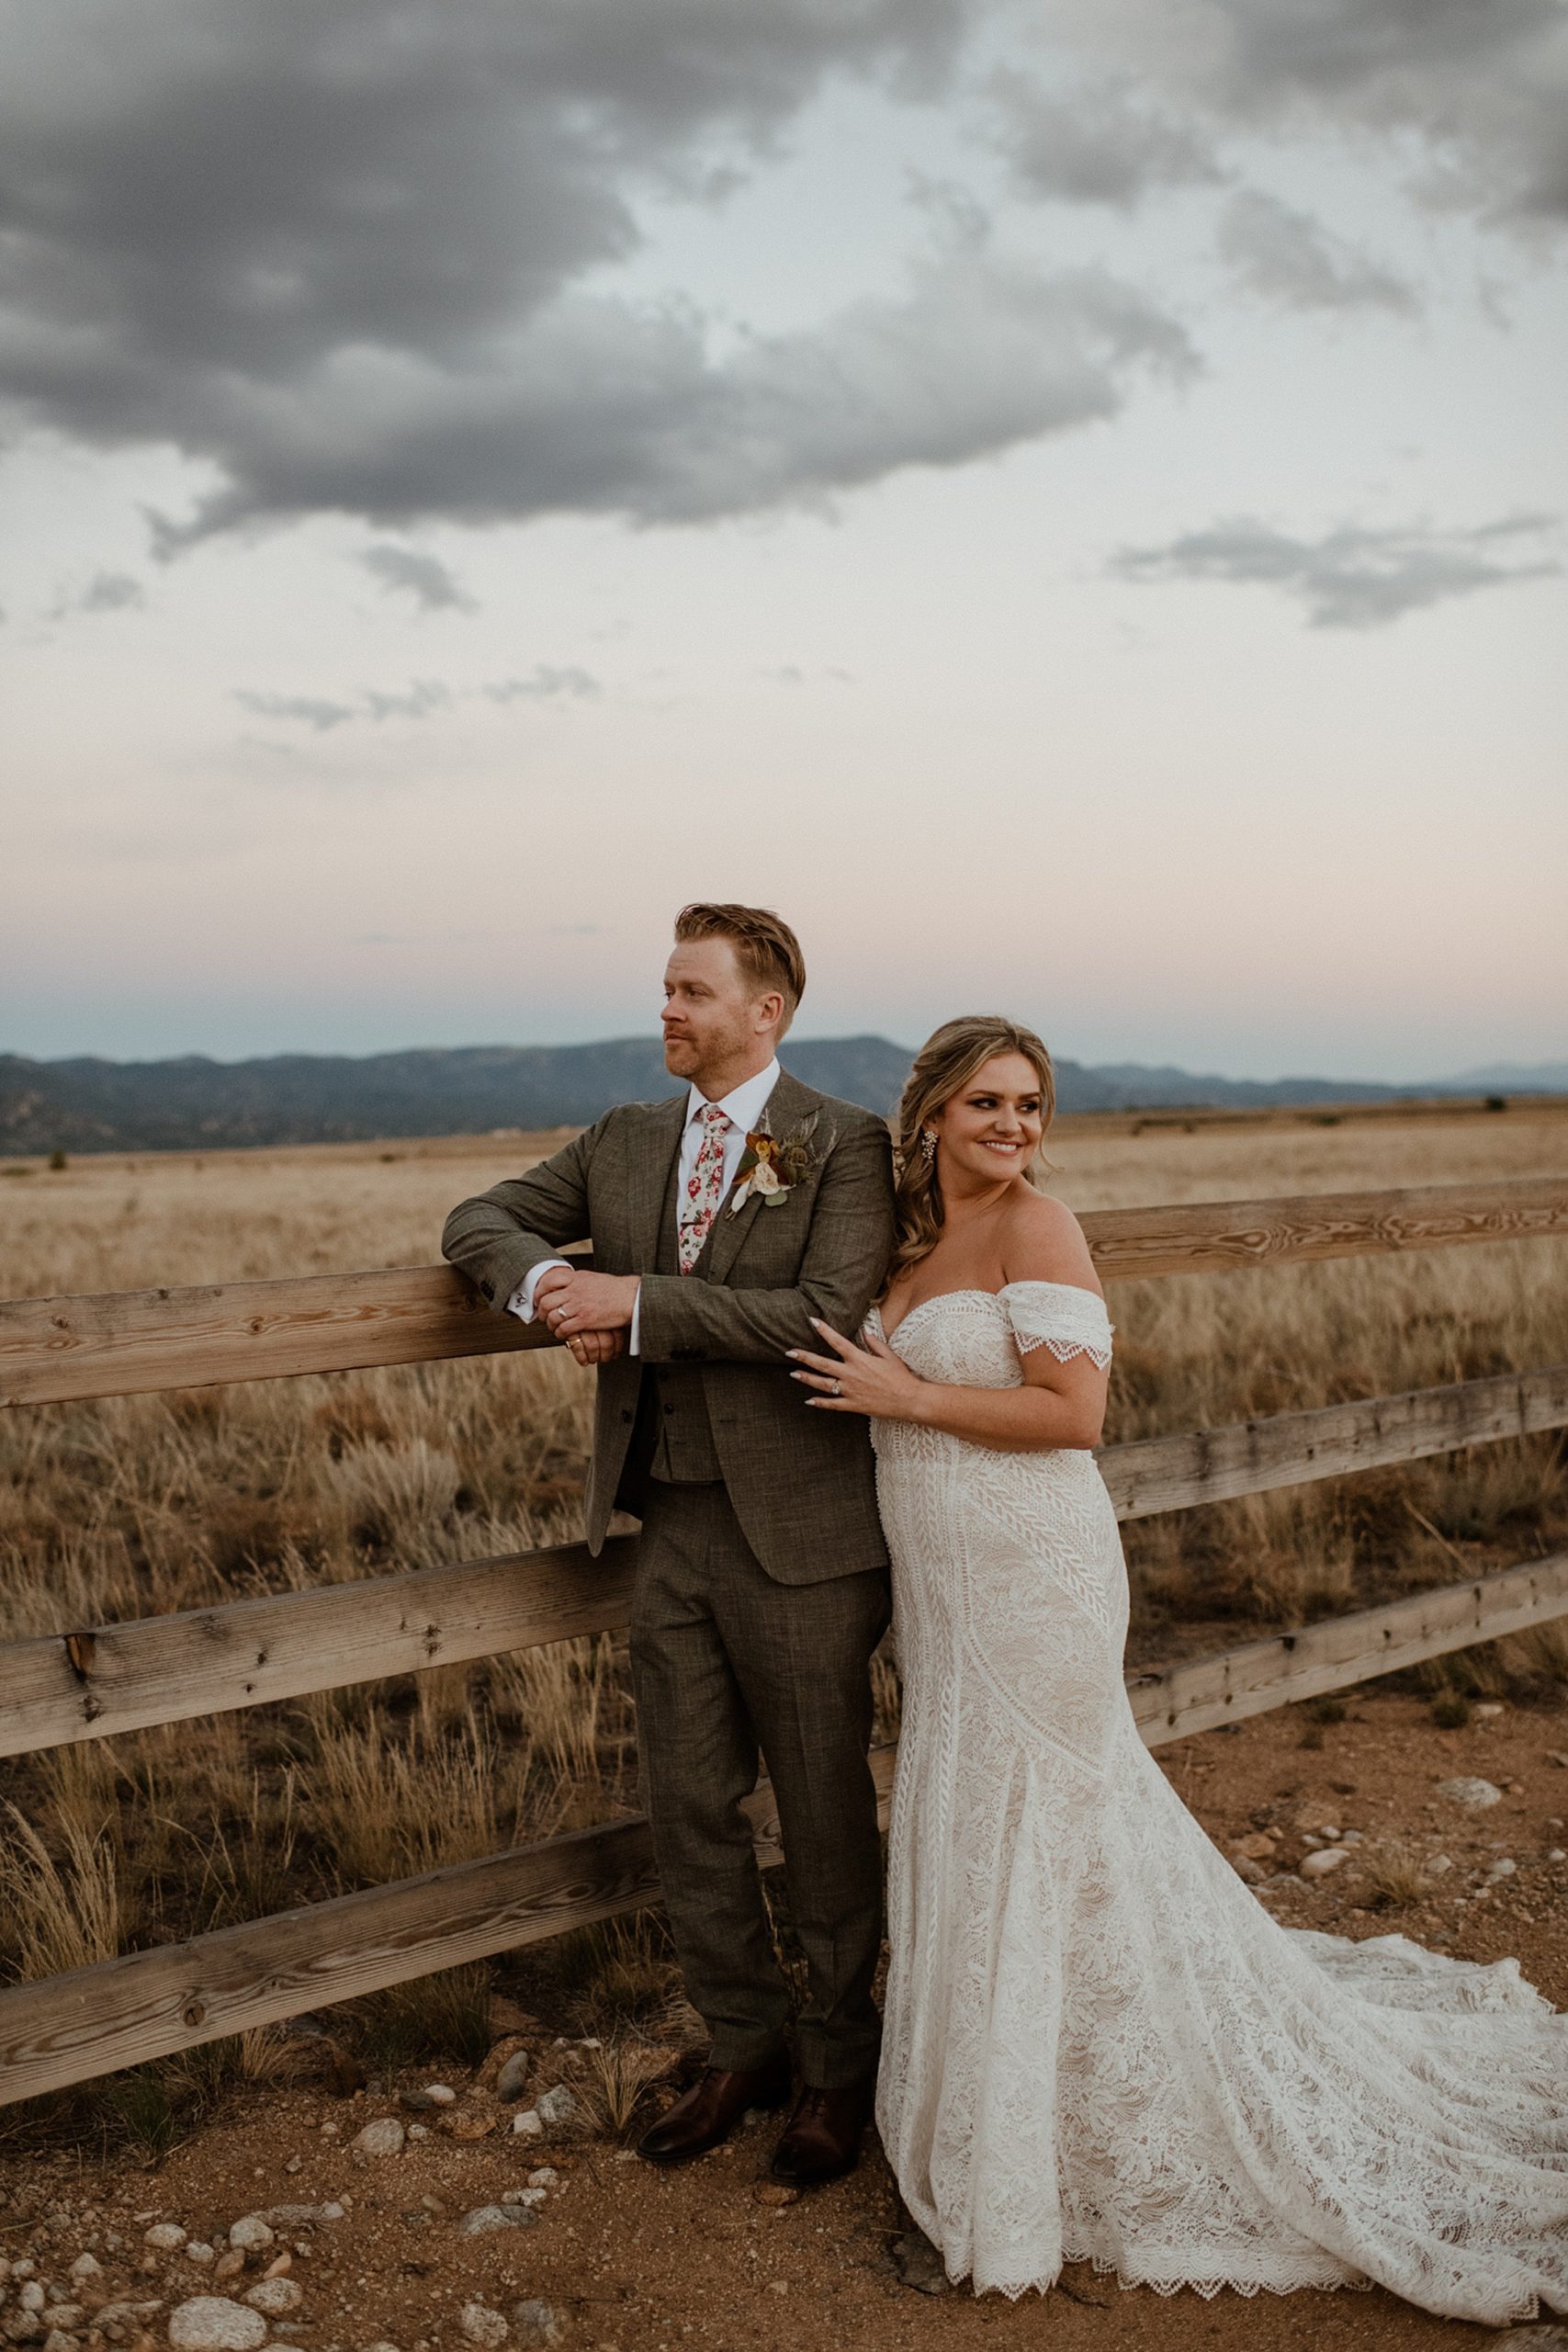 A bride and groom at sunset at the Barn at Sunset Ranch wedding venue